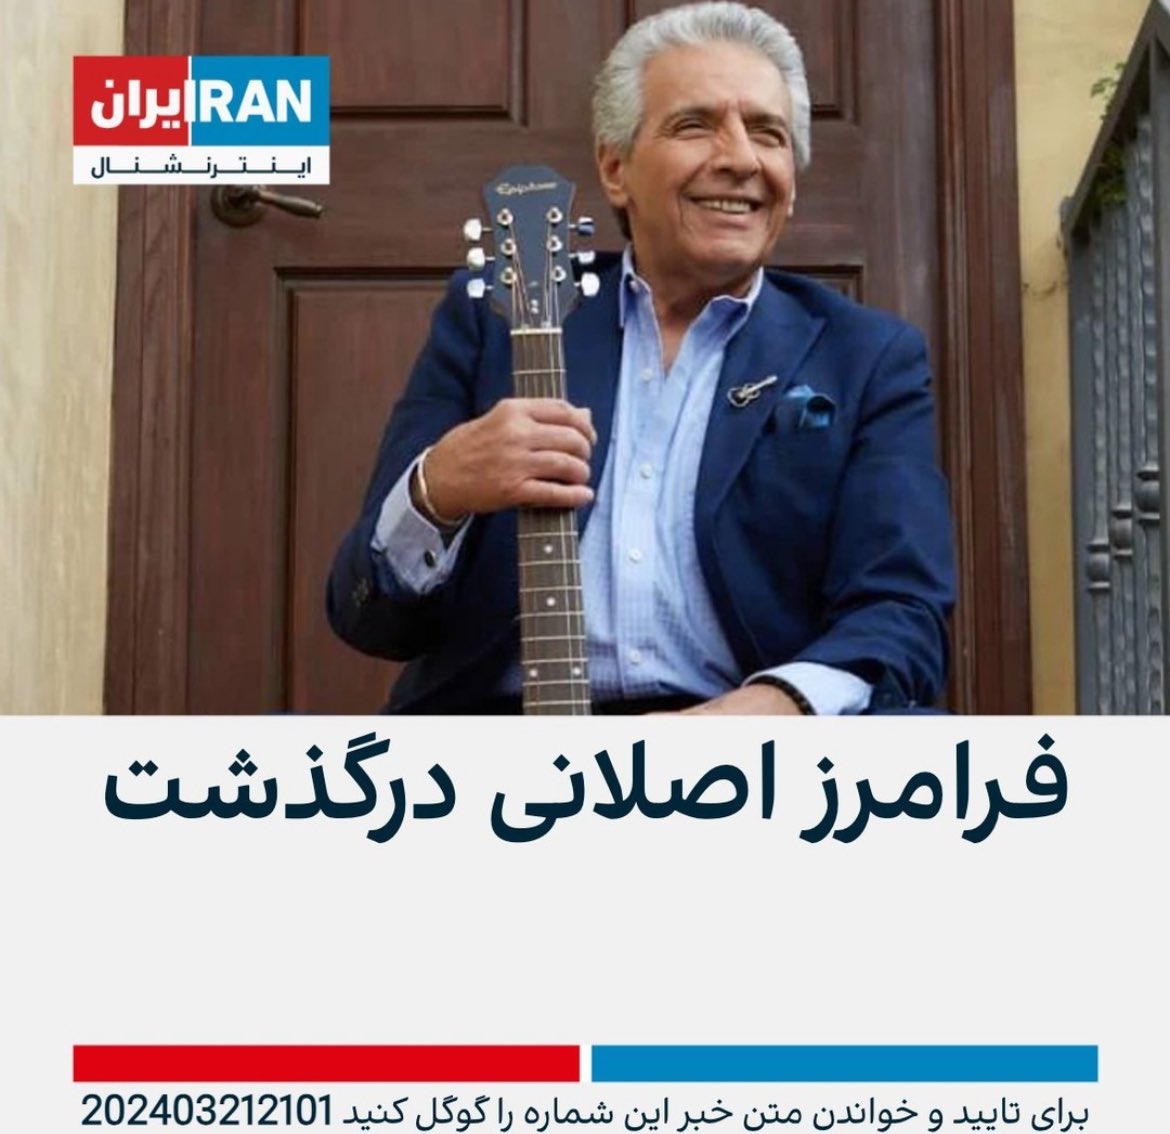 Faramarz Aslani an honorable musician & singer has sadly passed away.

Faramarz’s well known songs such as “Age Ye Rooz” will always remain in the hearts of all Iranians

Faramarz will always be remembered

Rest Easy Faramarz

خدا رحمت

🖤🕊️🎶🙏🏼😔

#فرامرز_اصلانی #FaramarzAslani